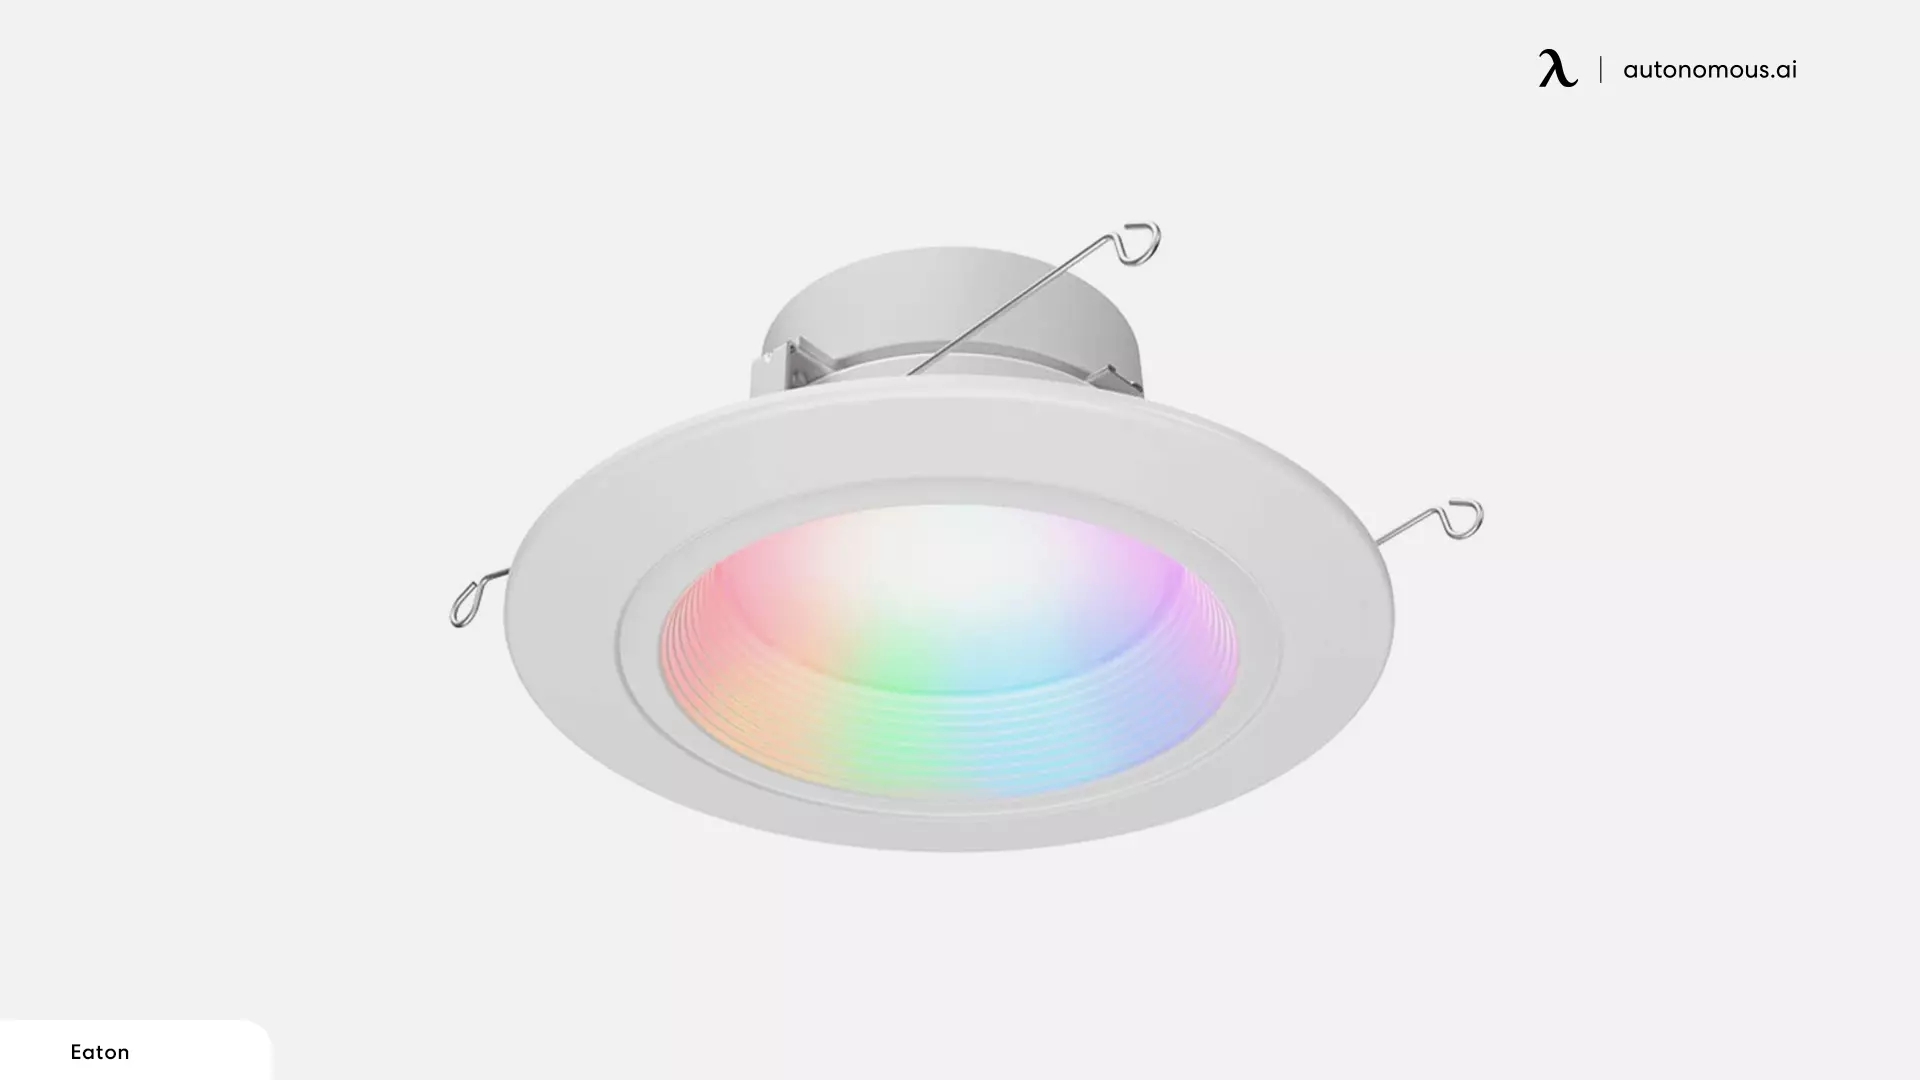 HALO White and Tunable Color LED Light